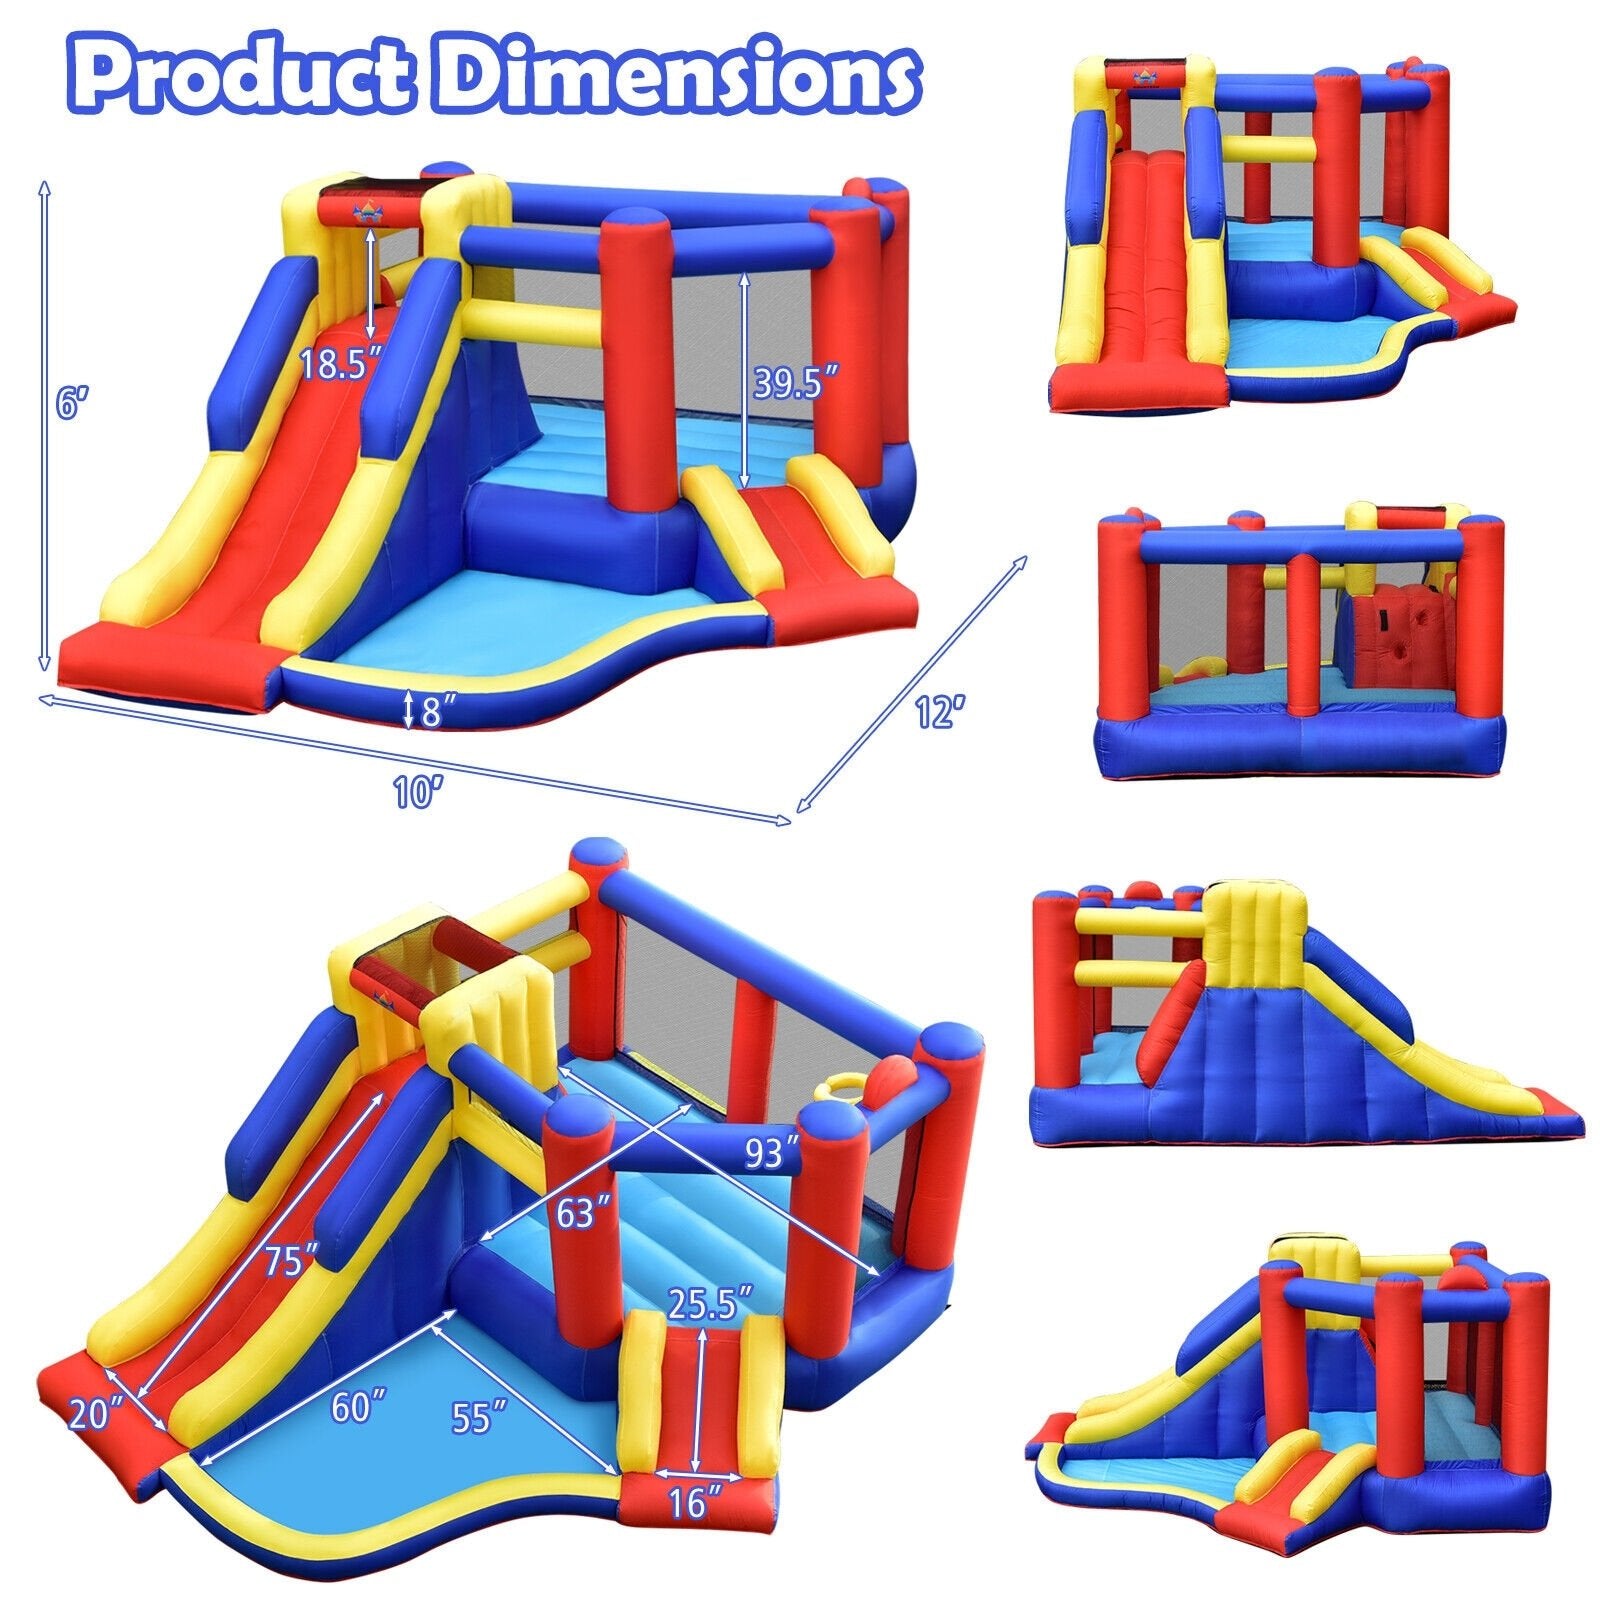 Kids Inflatable Bouncy Castle with Double Slides without Air Blower - Gallery Canada